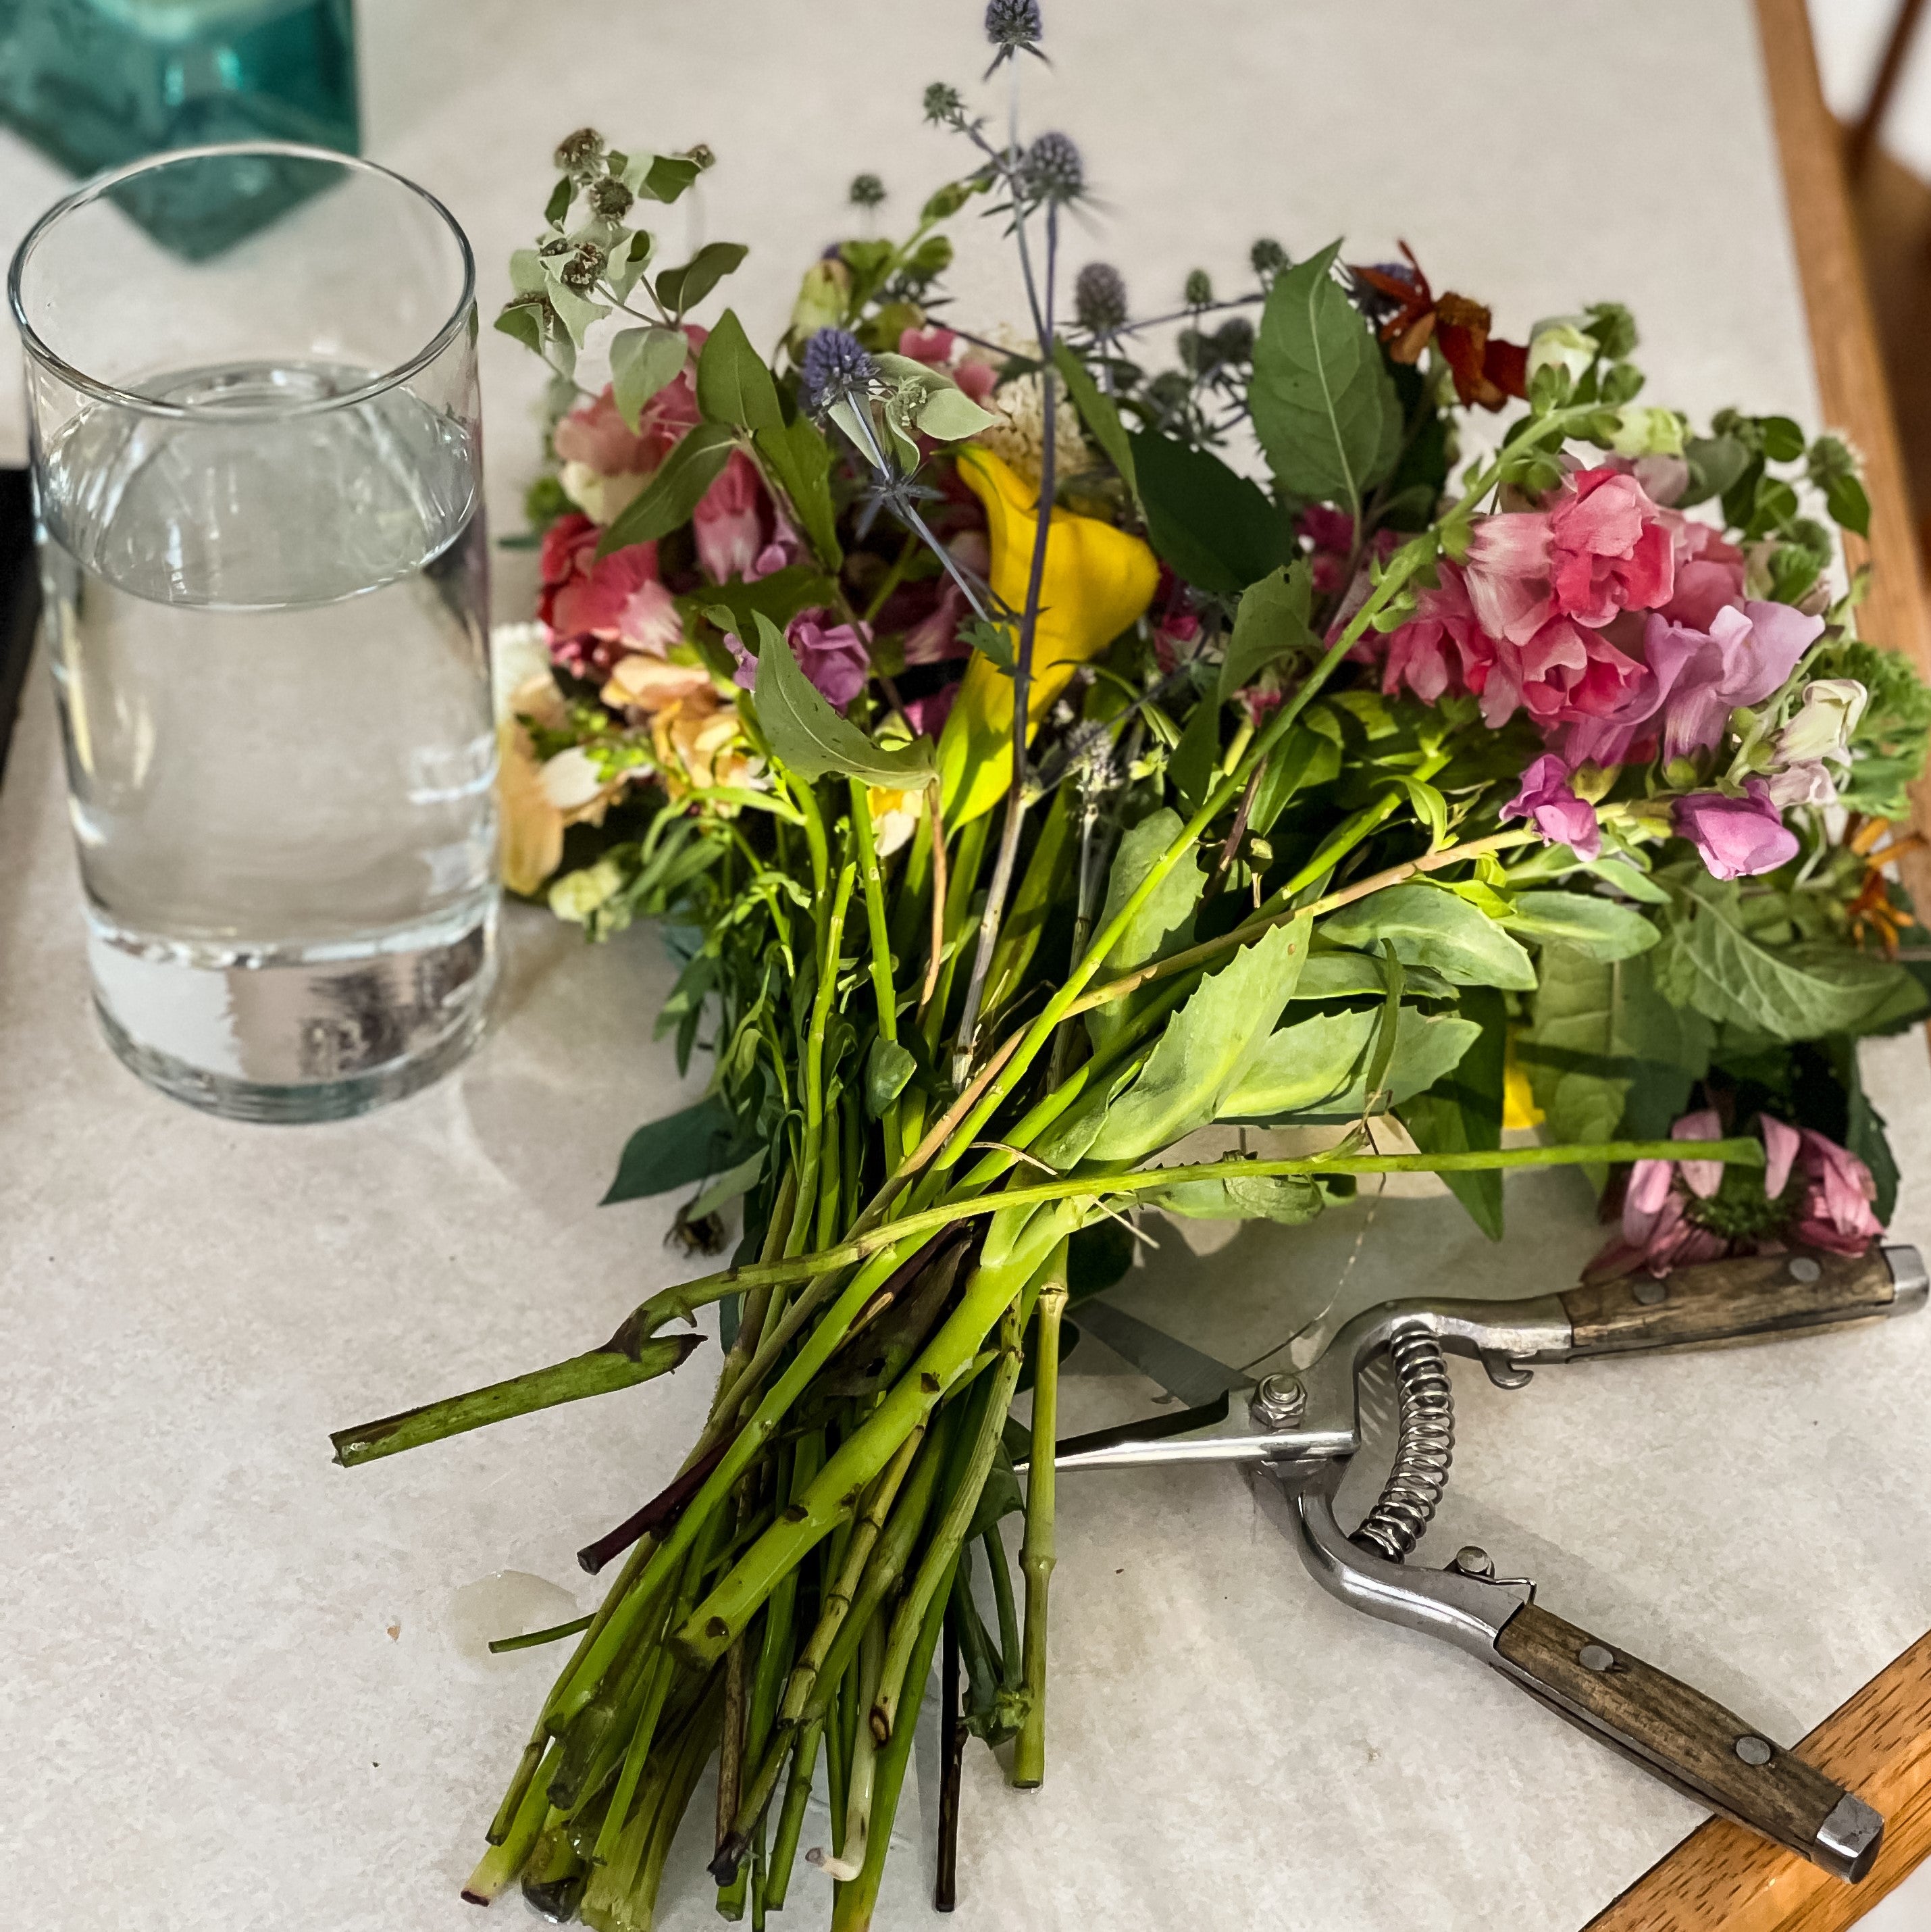 How to Keep Fresh Flowers Alive Longer